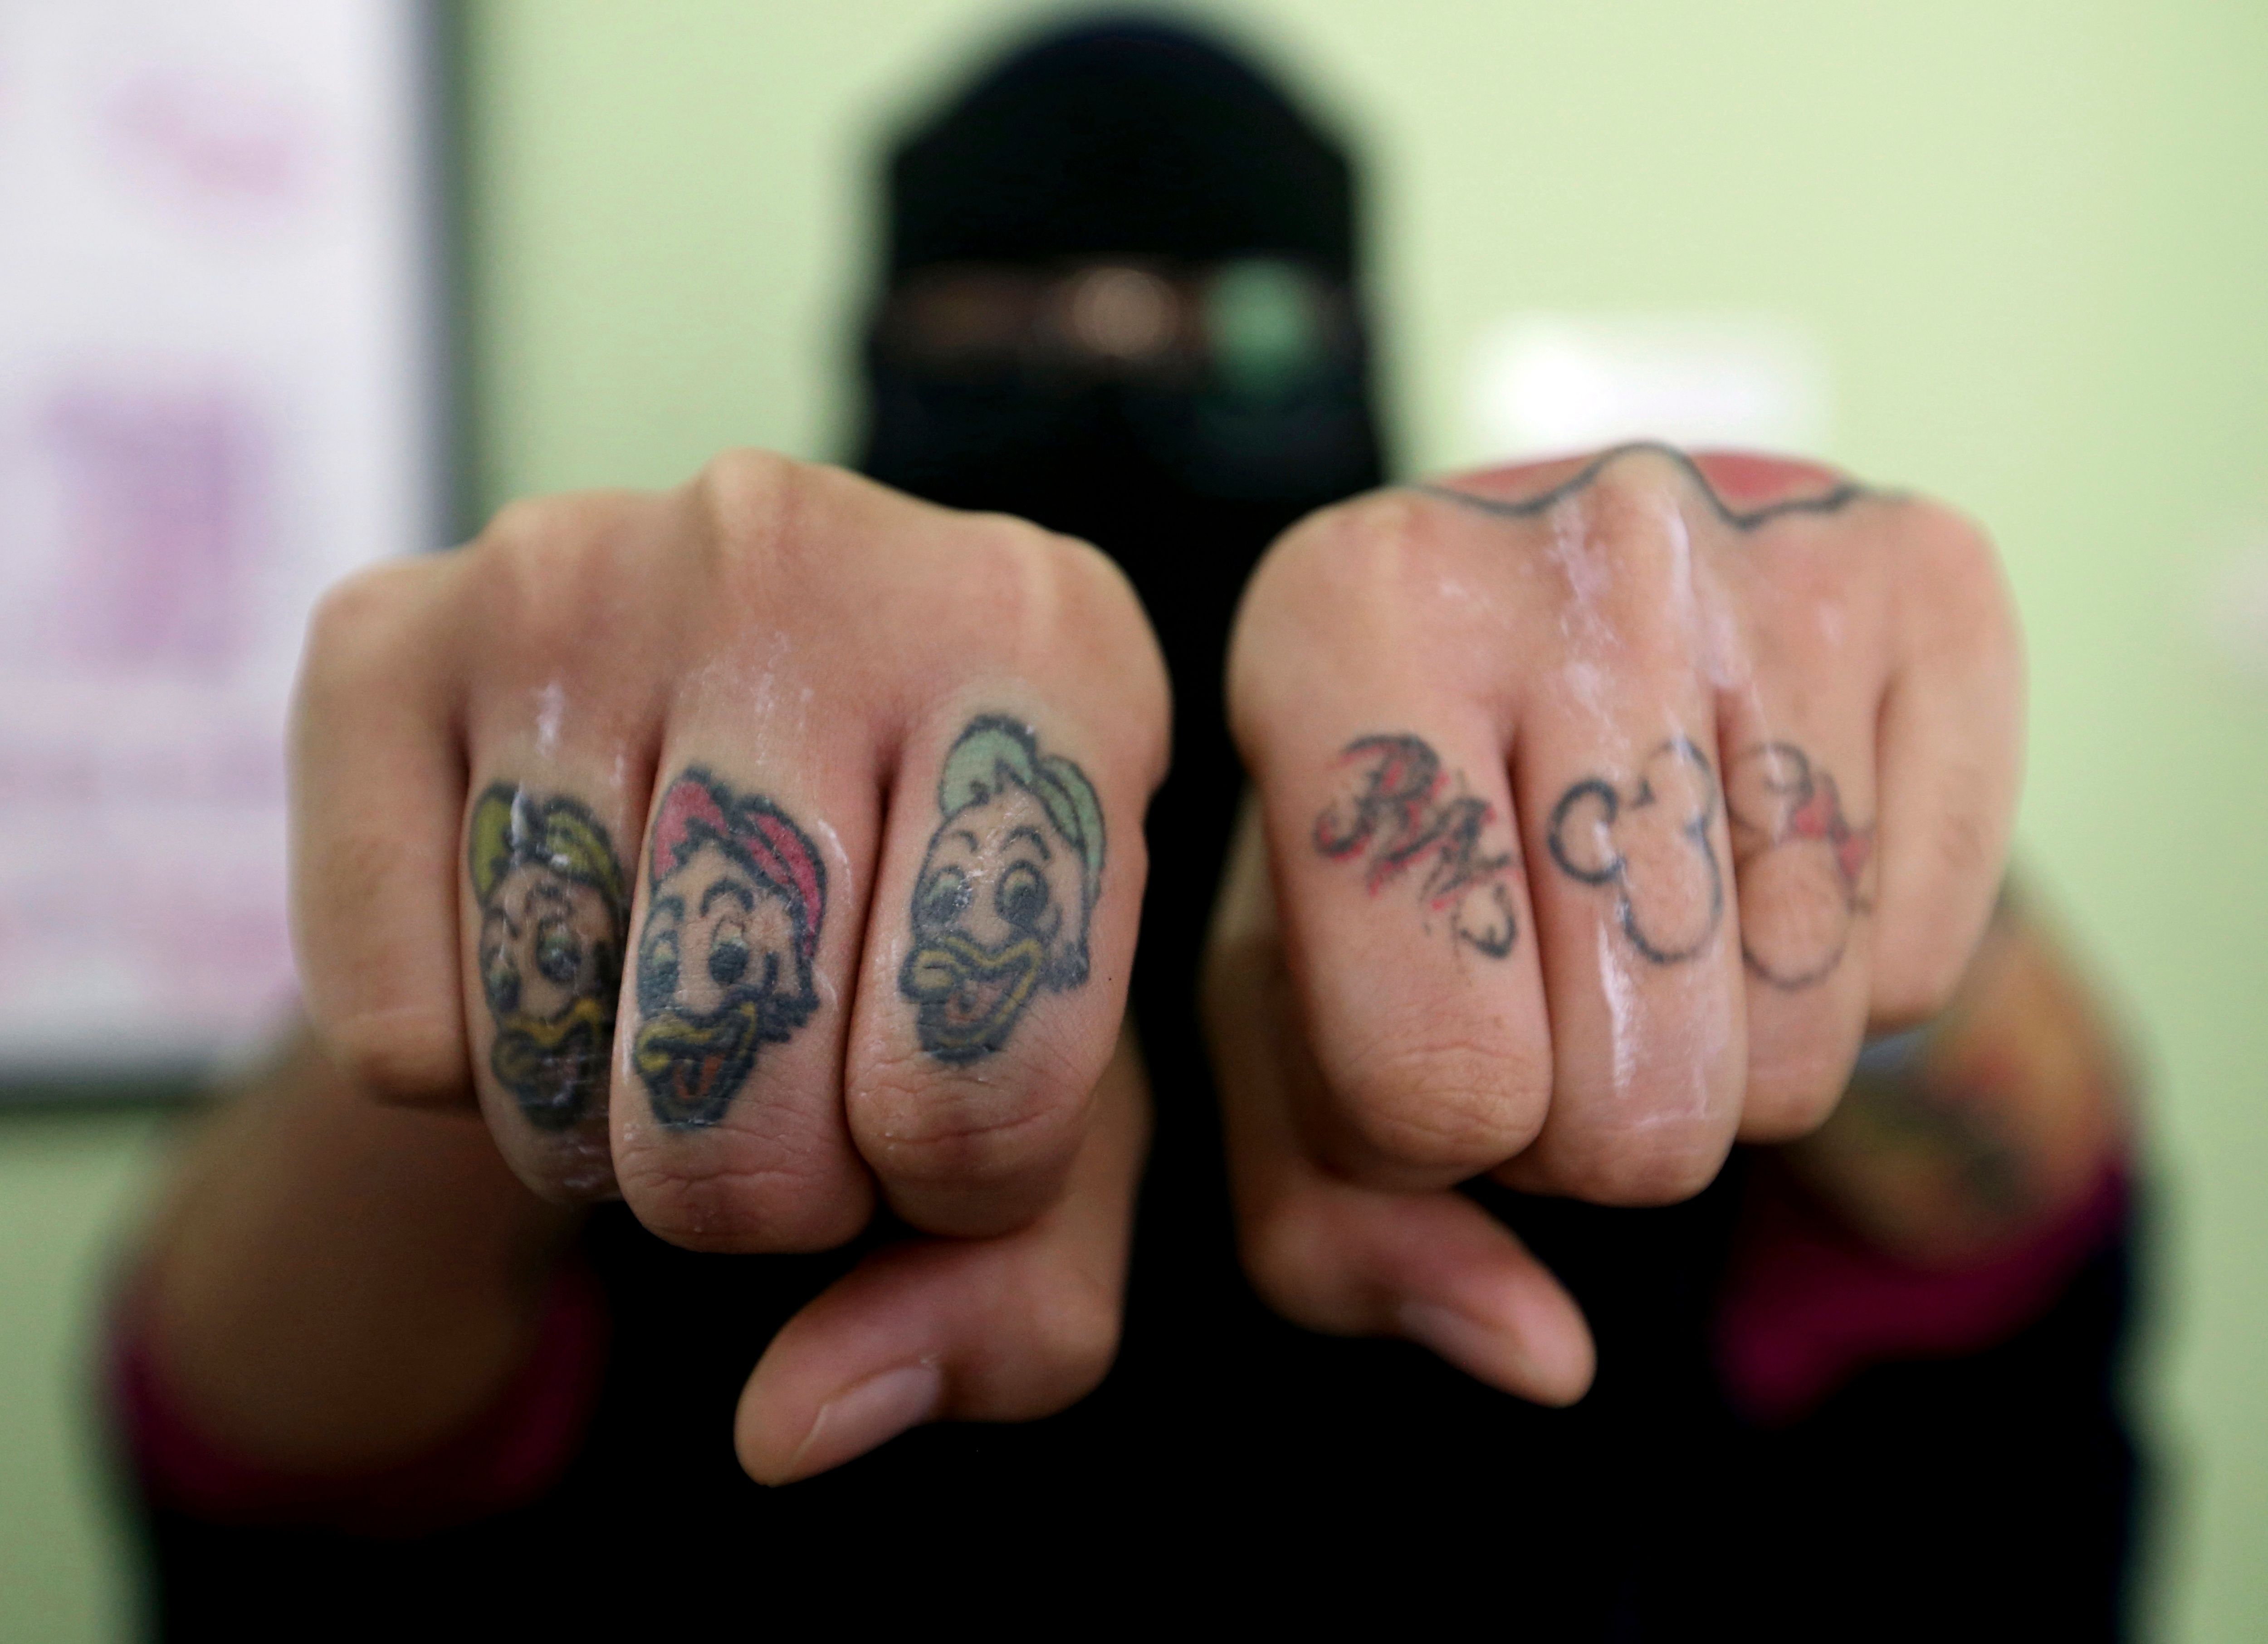 Expressing Oneself Through Body Ink: Allowed for Muslims? | Across Cultures